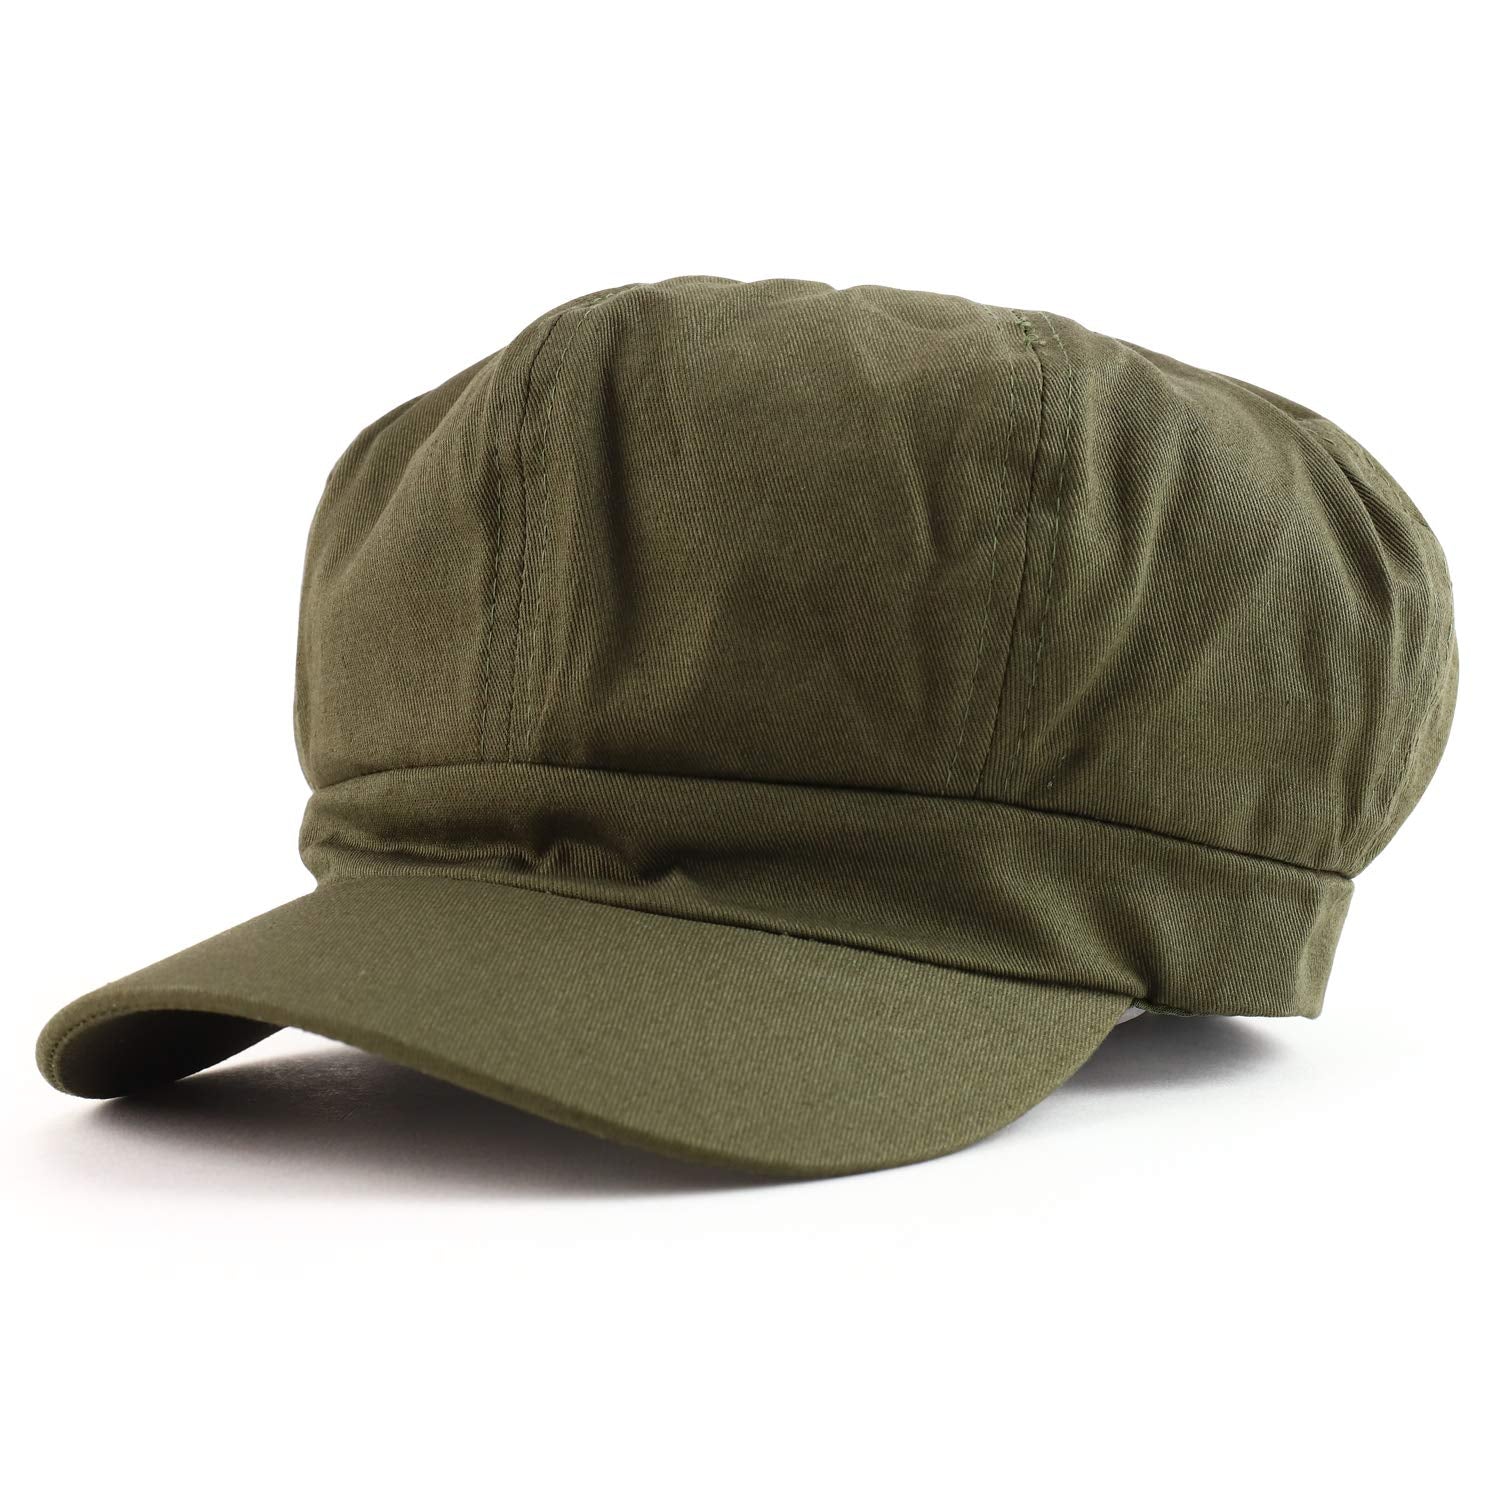 Women's Lightweight 100% Cotton Soft Fit Newsboy Cap with Elastic Back - Black Olive